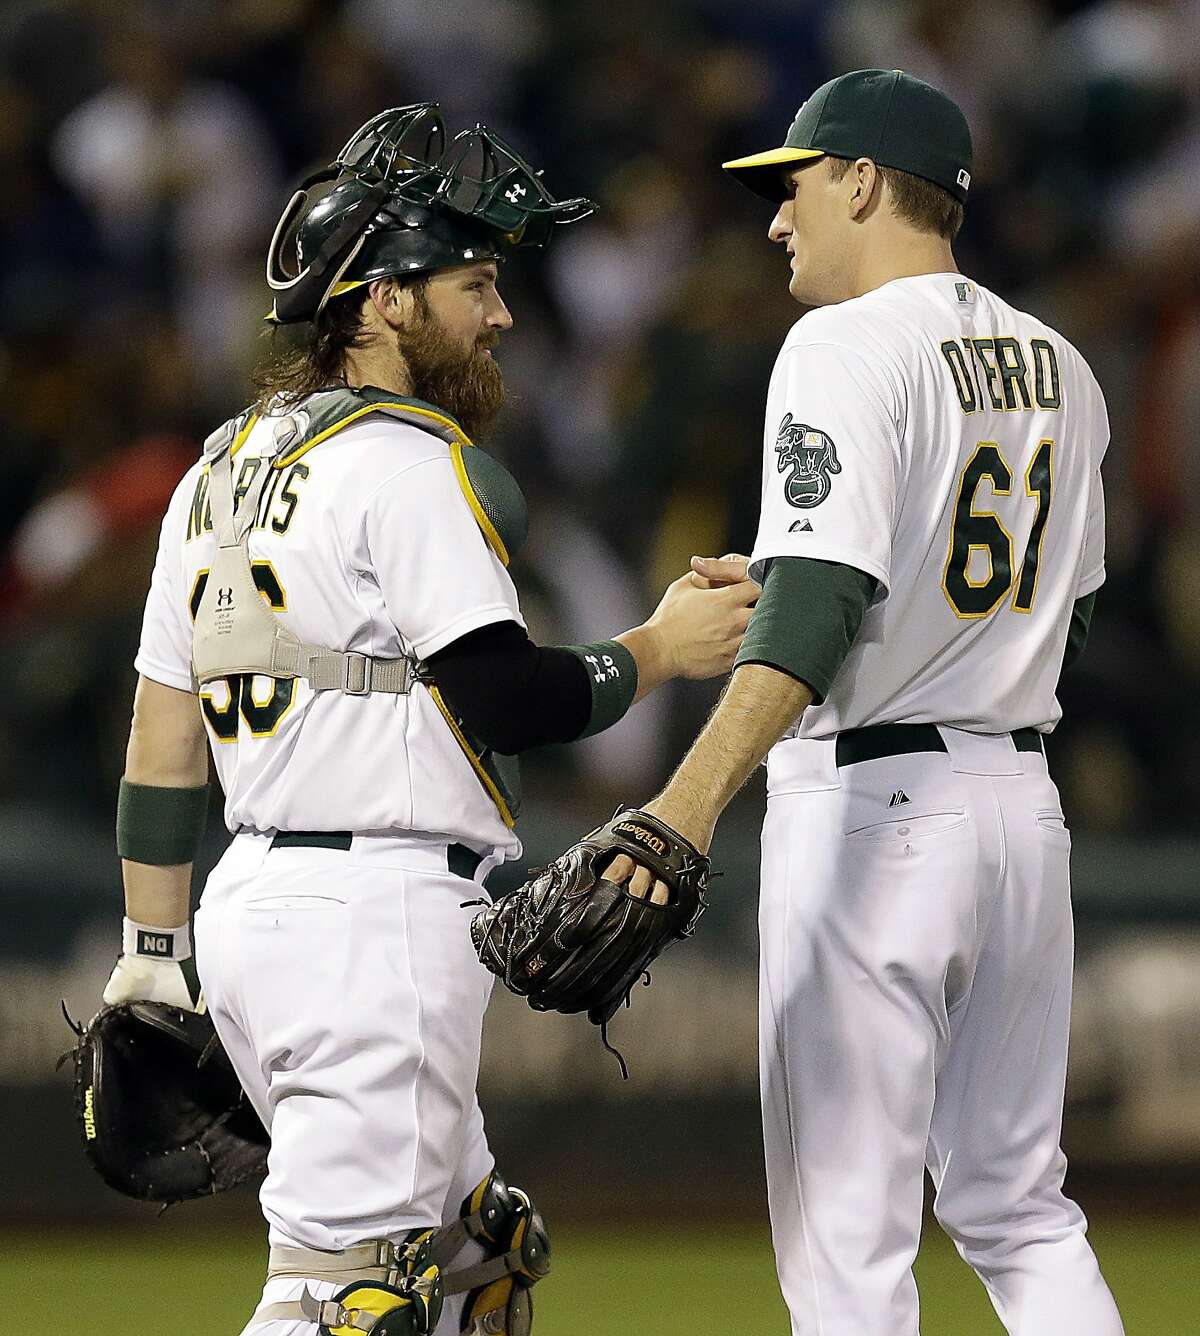 Oakland Athletics' Derek Norris, left, and Dan Otero (61) celebrate after the 4-2 defeat of the Boston Red Sox at the end of a baseball game Thursday, June 19, 2014, in Oakland, Calif. (AP Photo/Ben Margot)